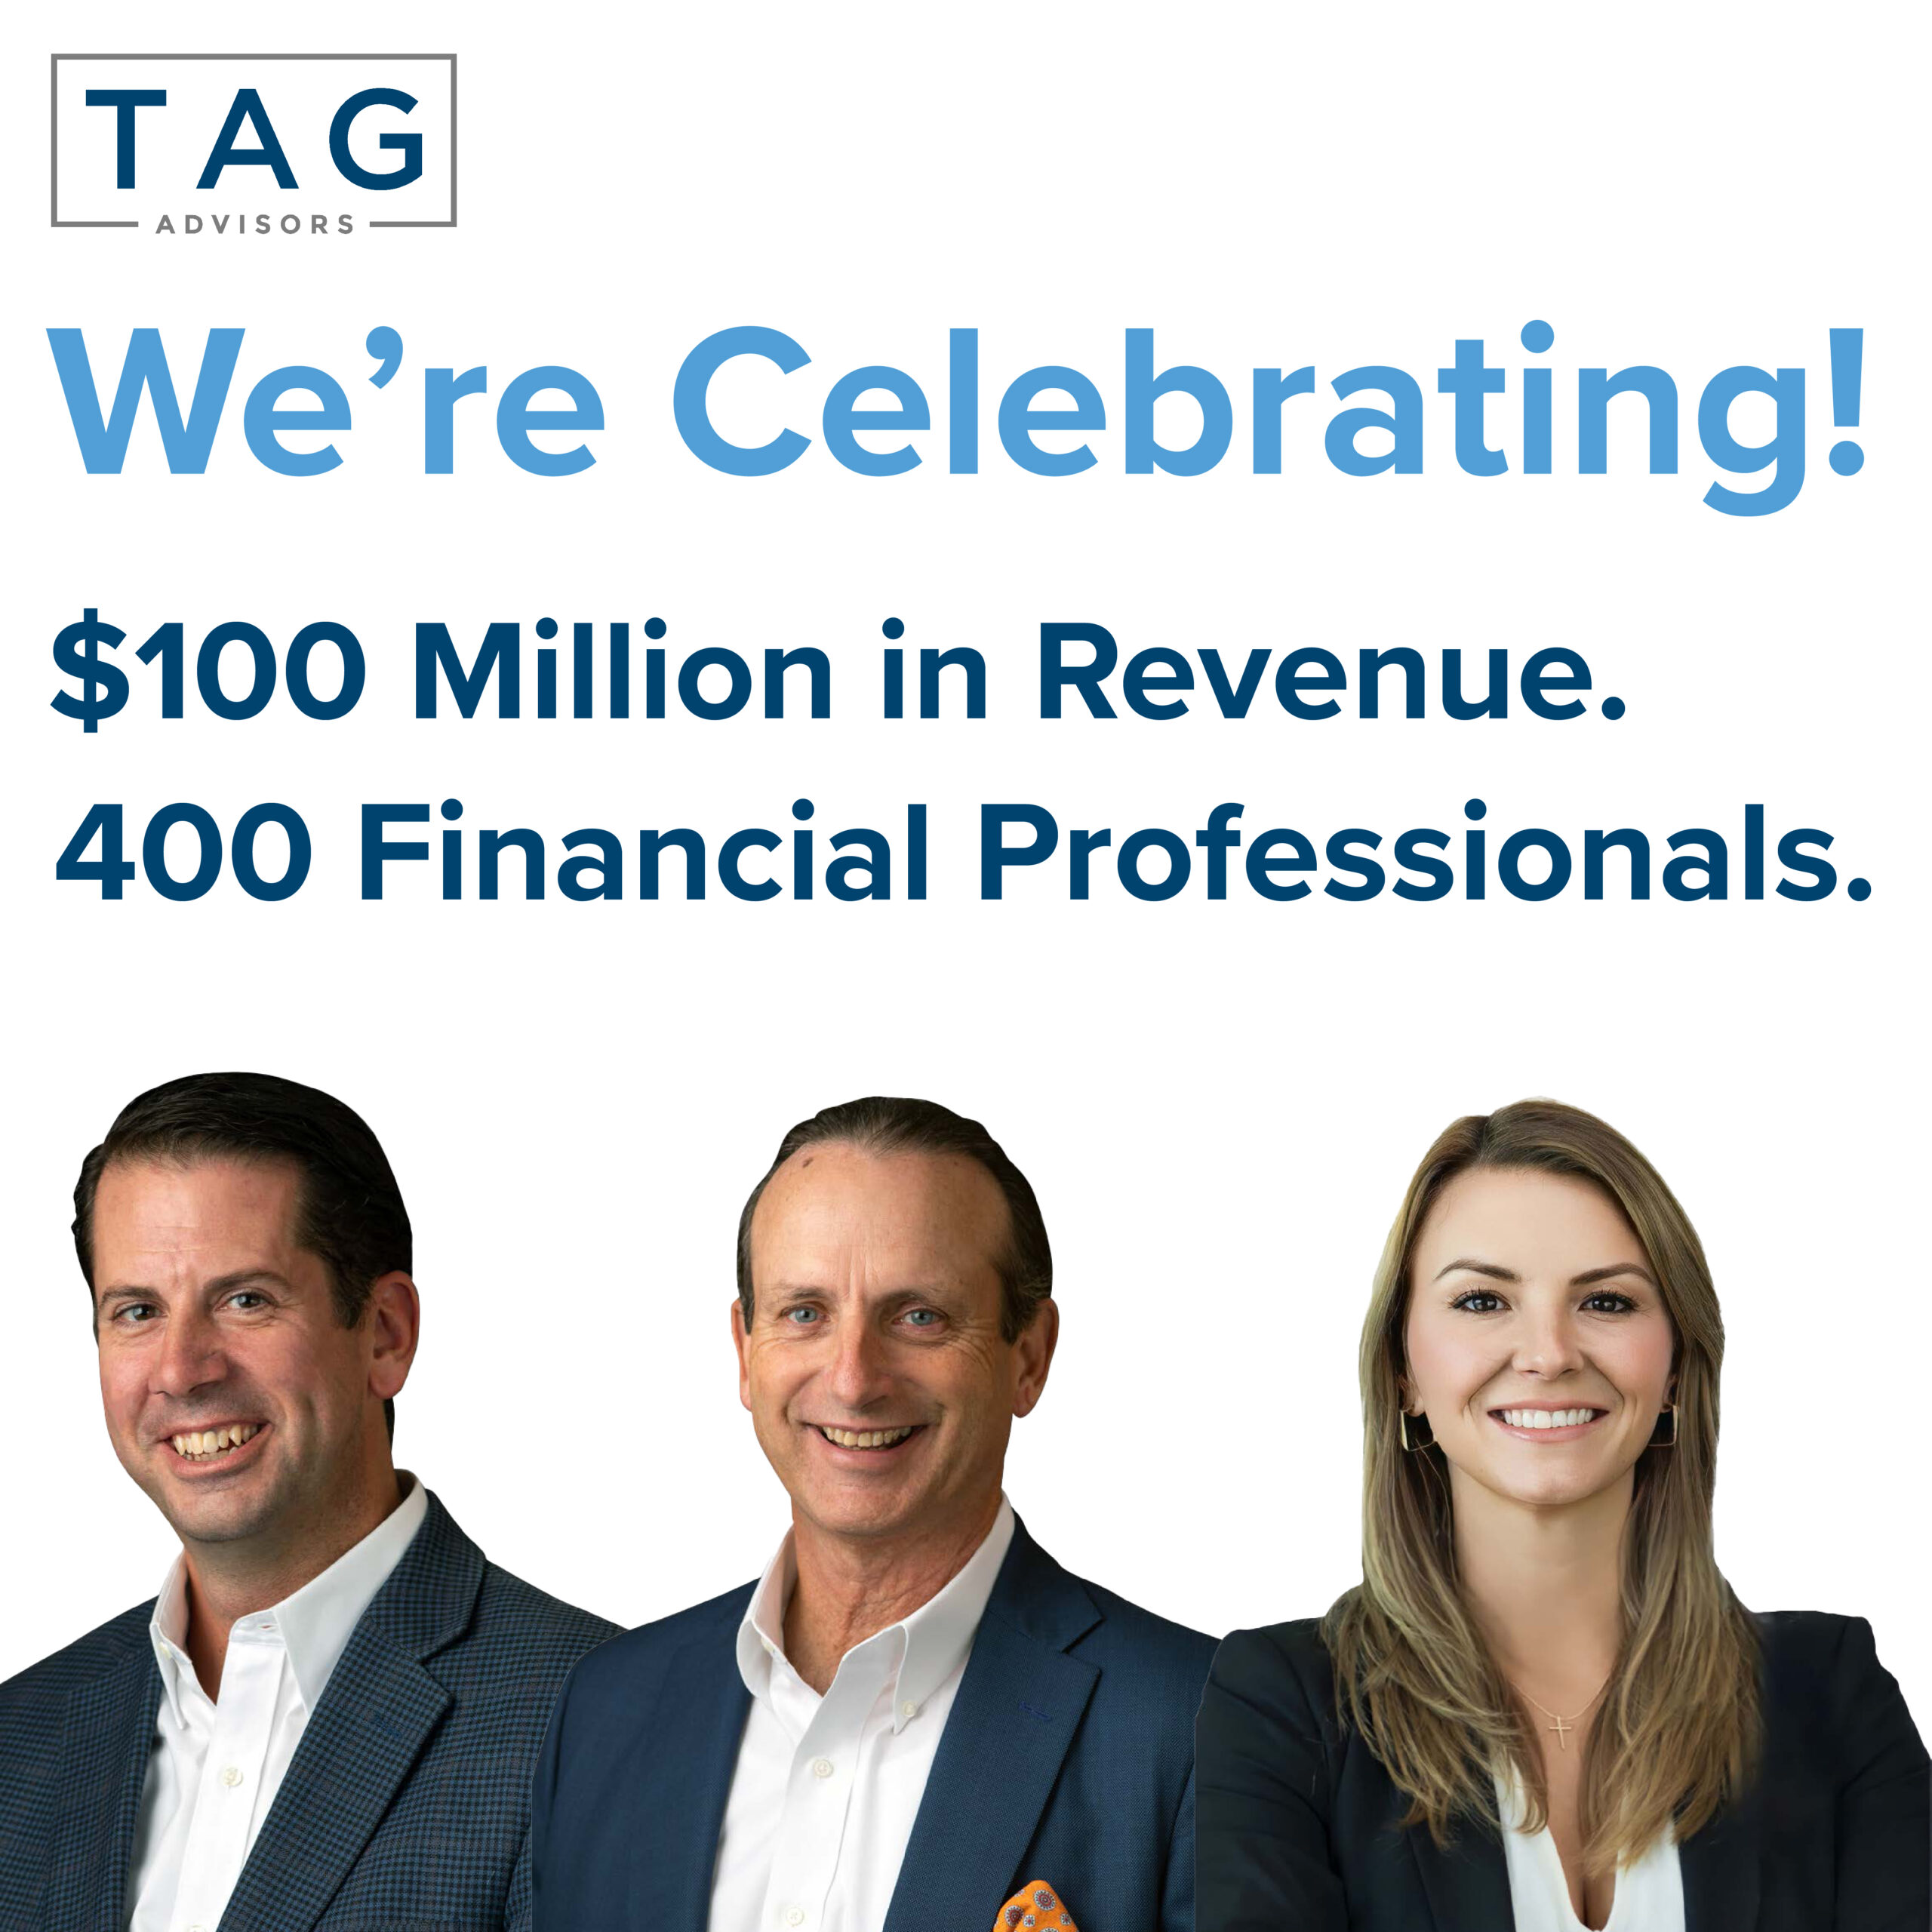 TAG Advisors sets record for revenue, number of advisors